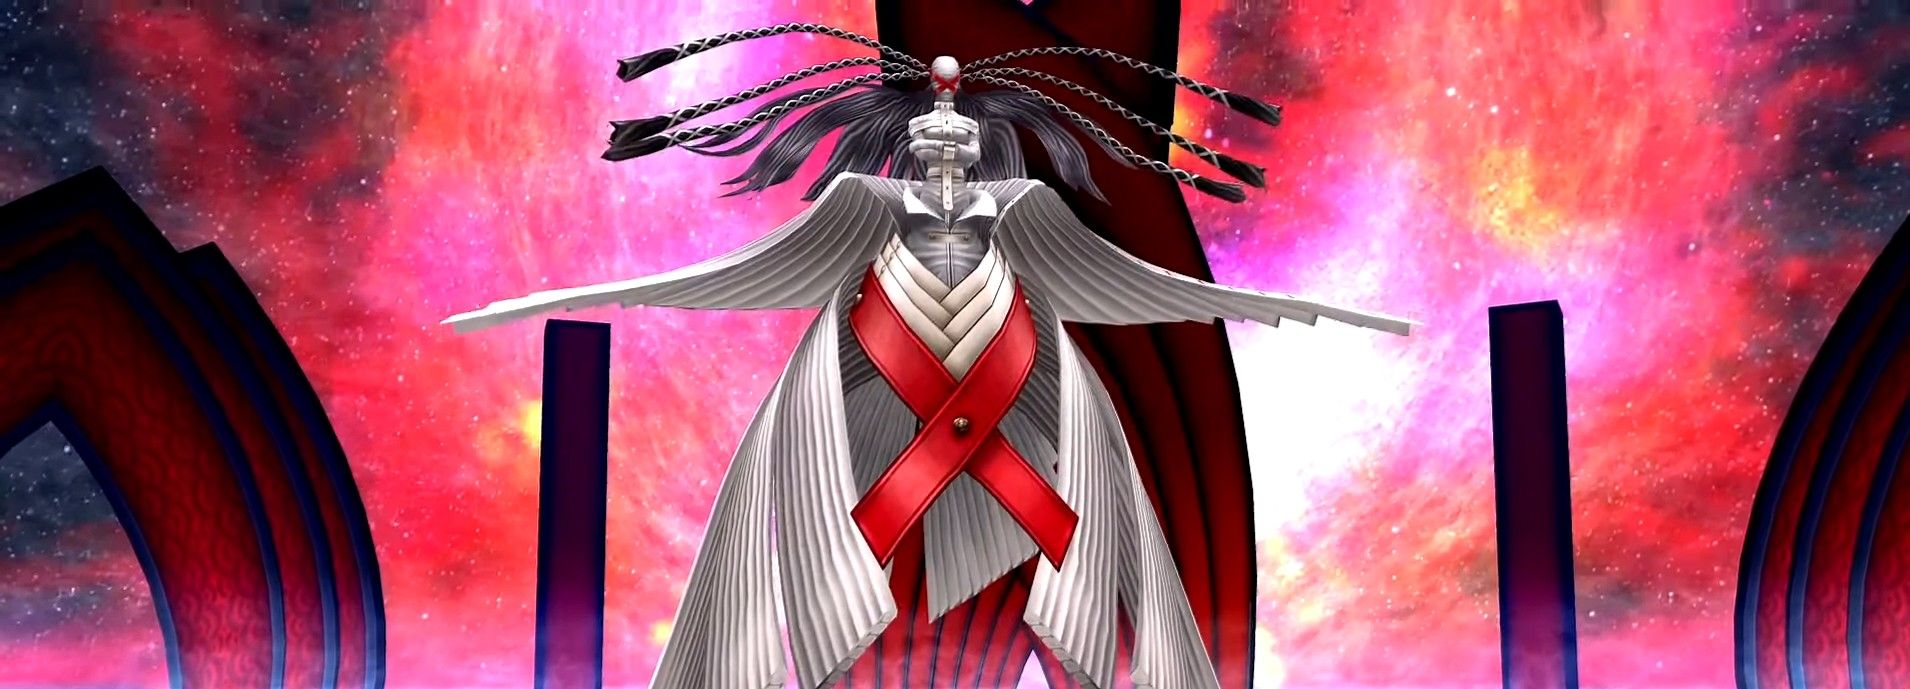 wide shot of izanami during the final battle in persona 4 golden